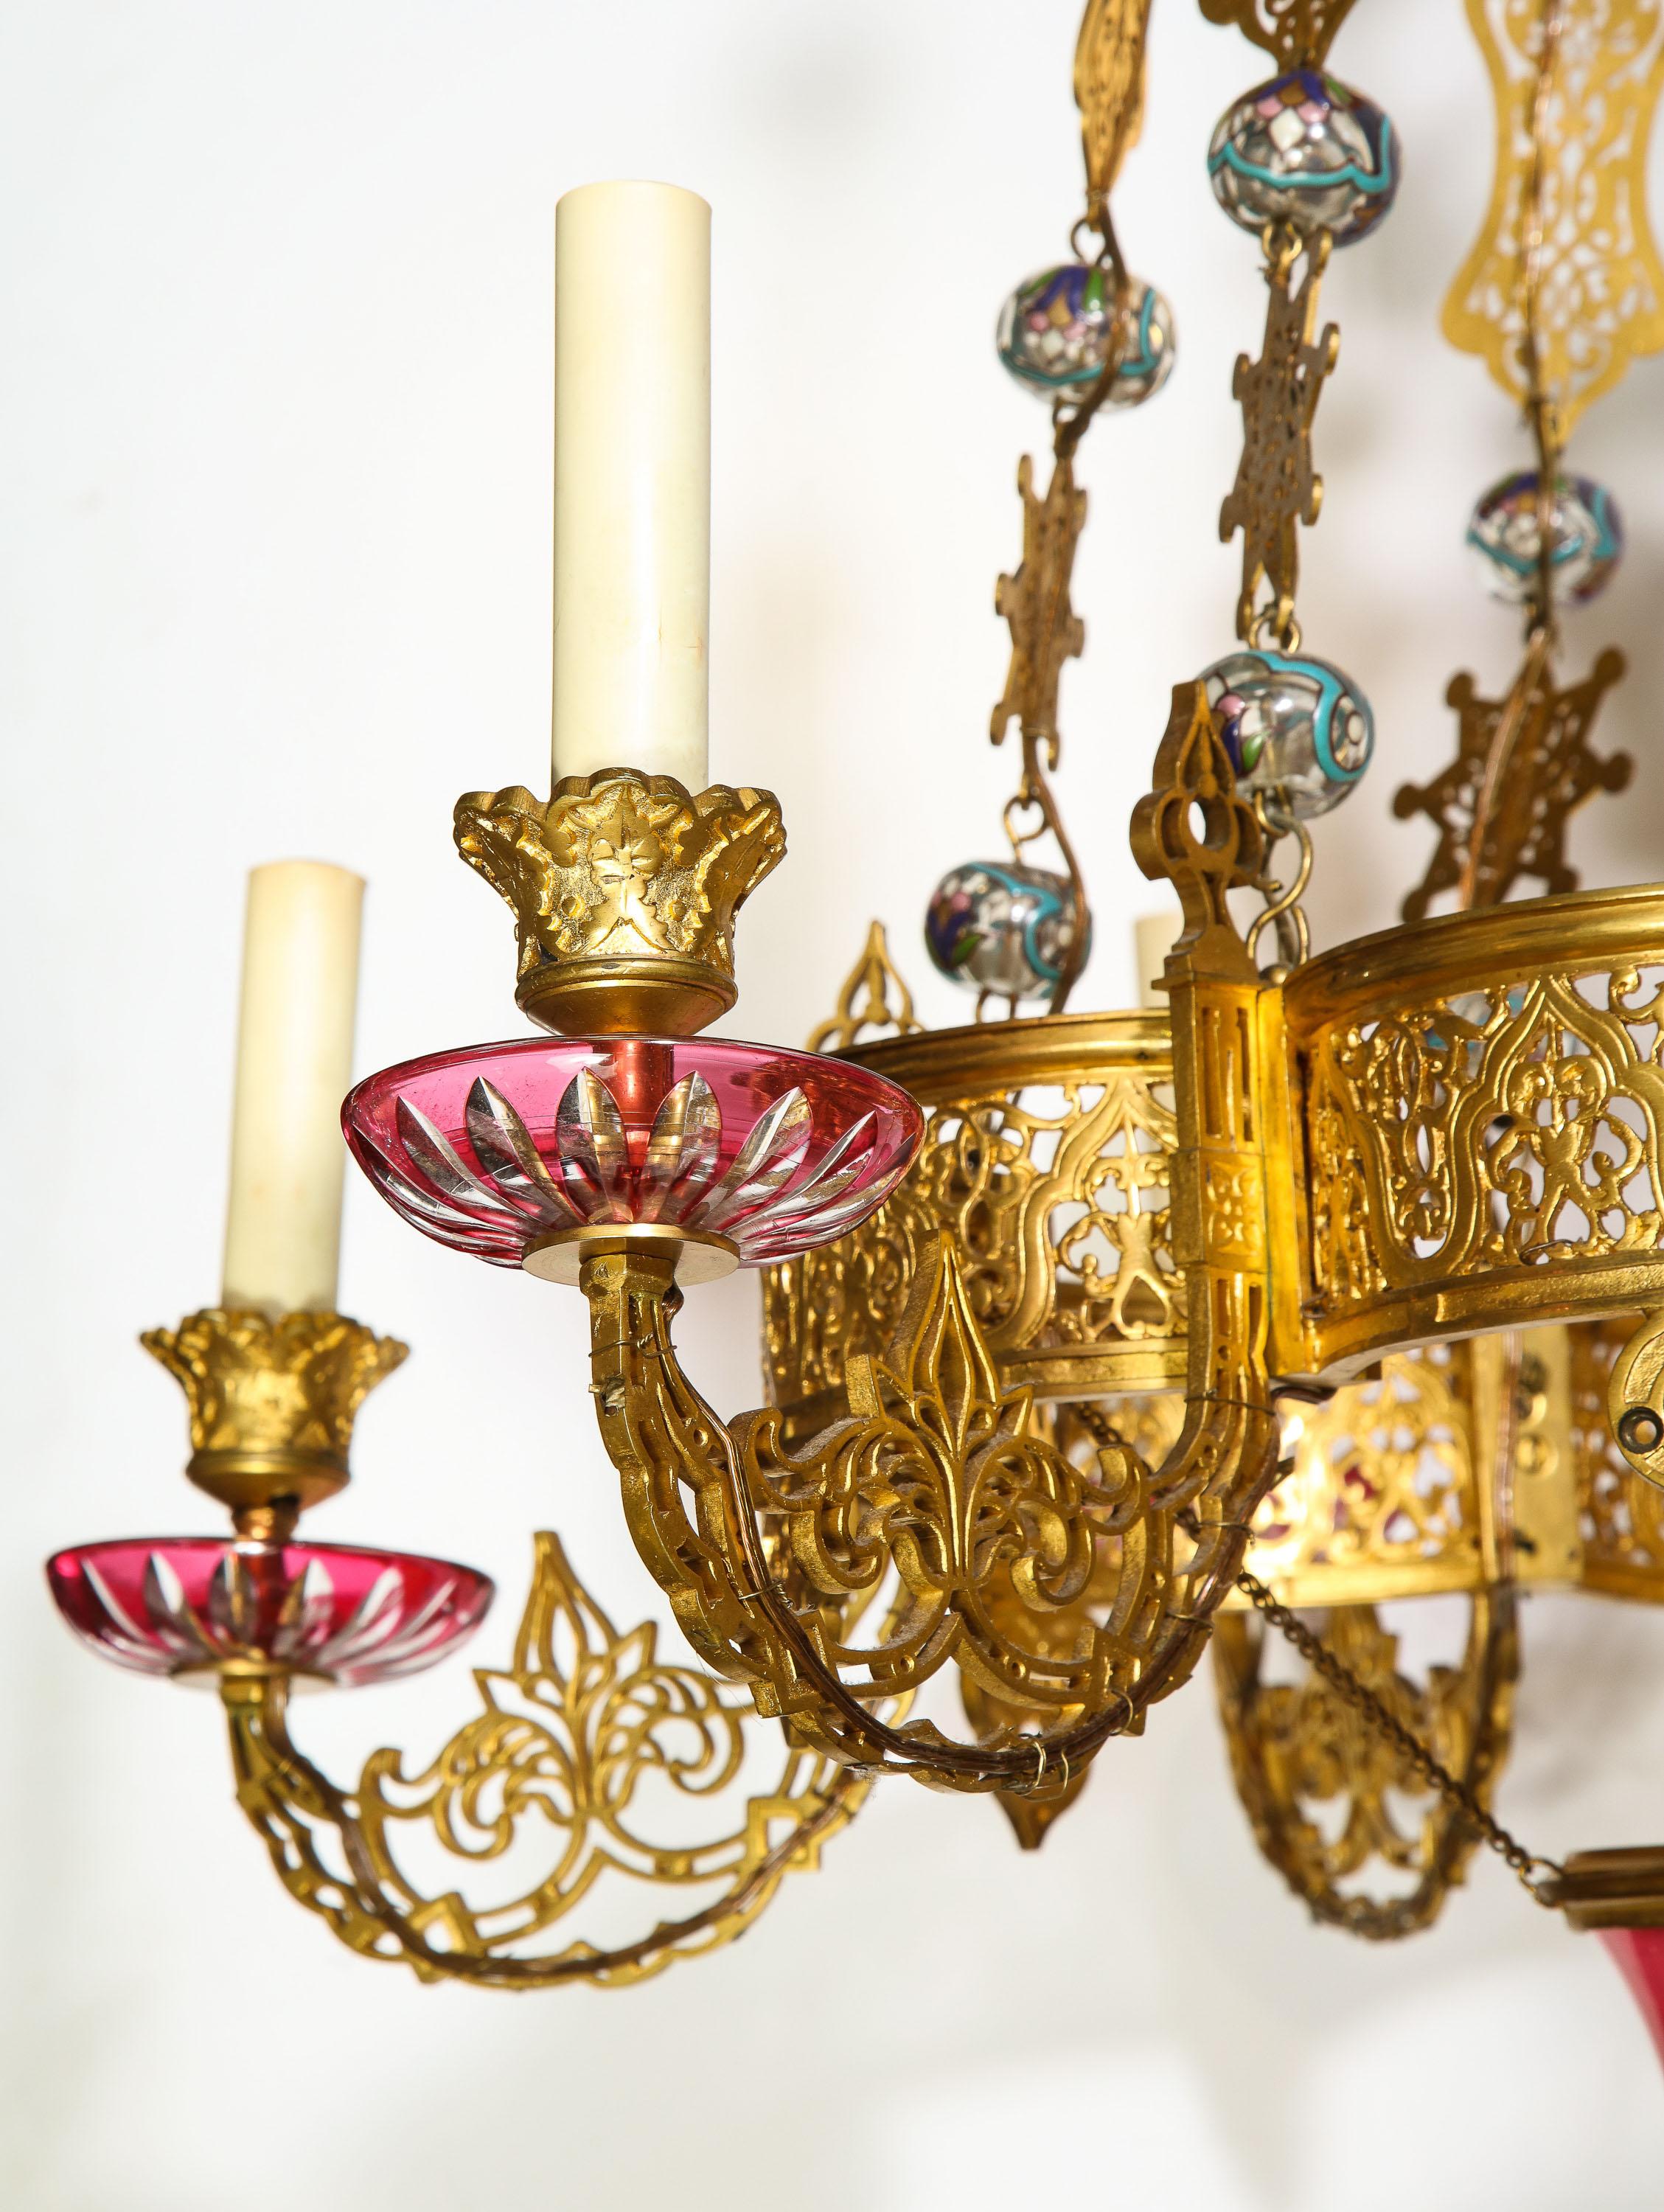 Exceptional and Rare Islamic Alhambra Bronze and Enameled Glass Chandelier In Good Condition For Sale In New York, NY